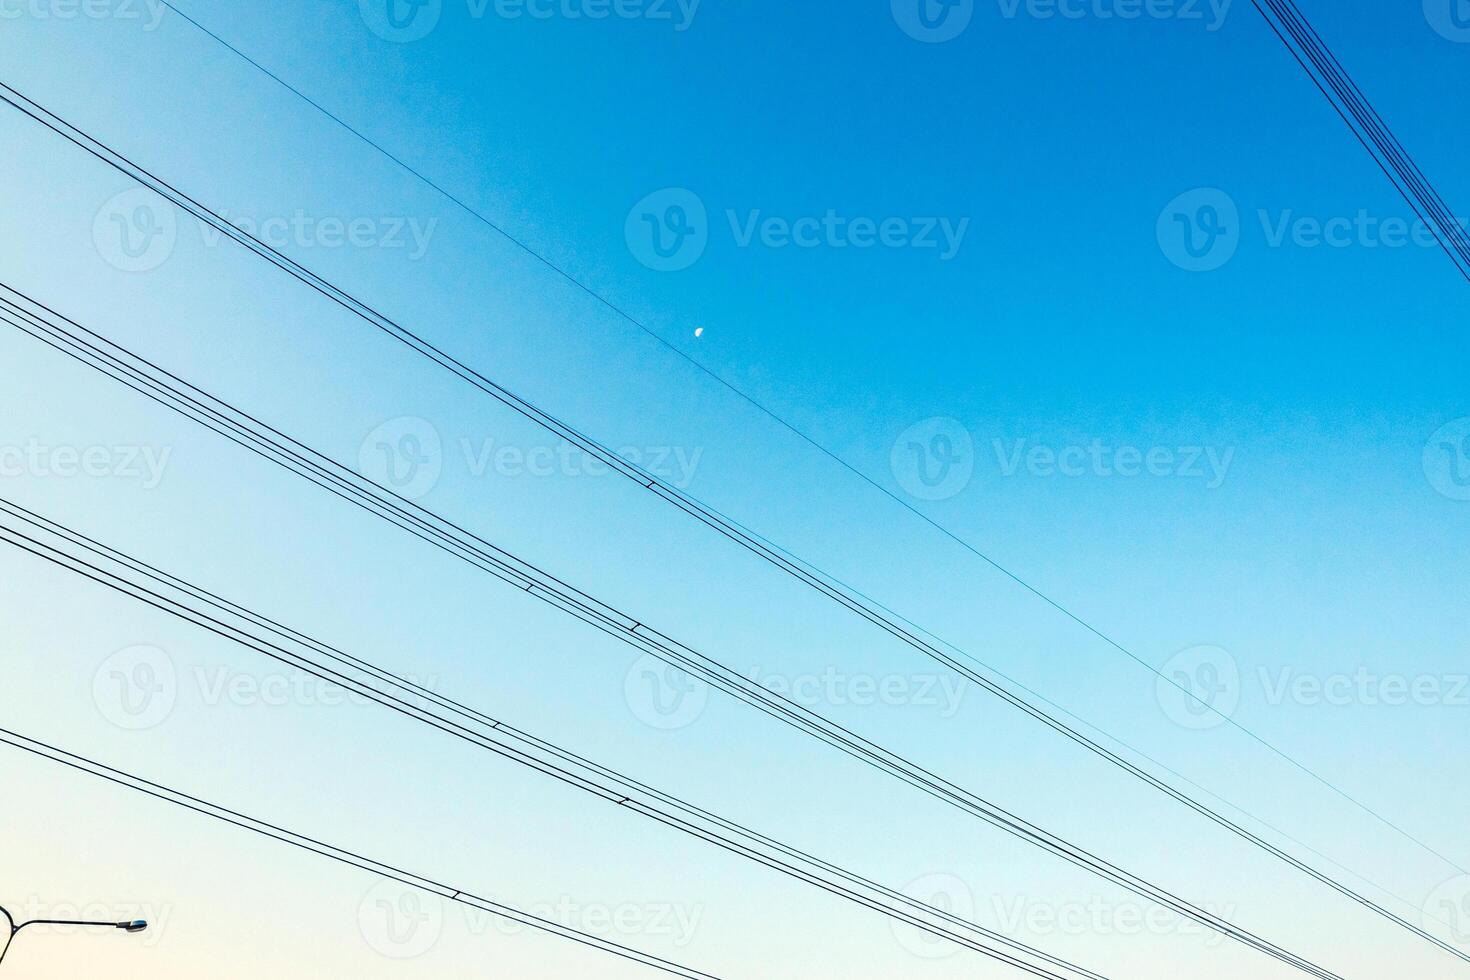 The electrical cables cross the blue sky photo